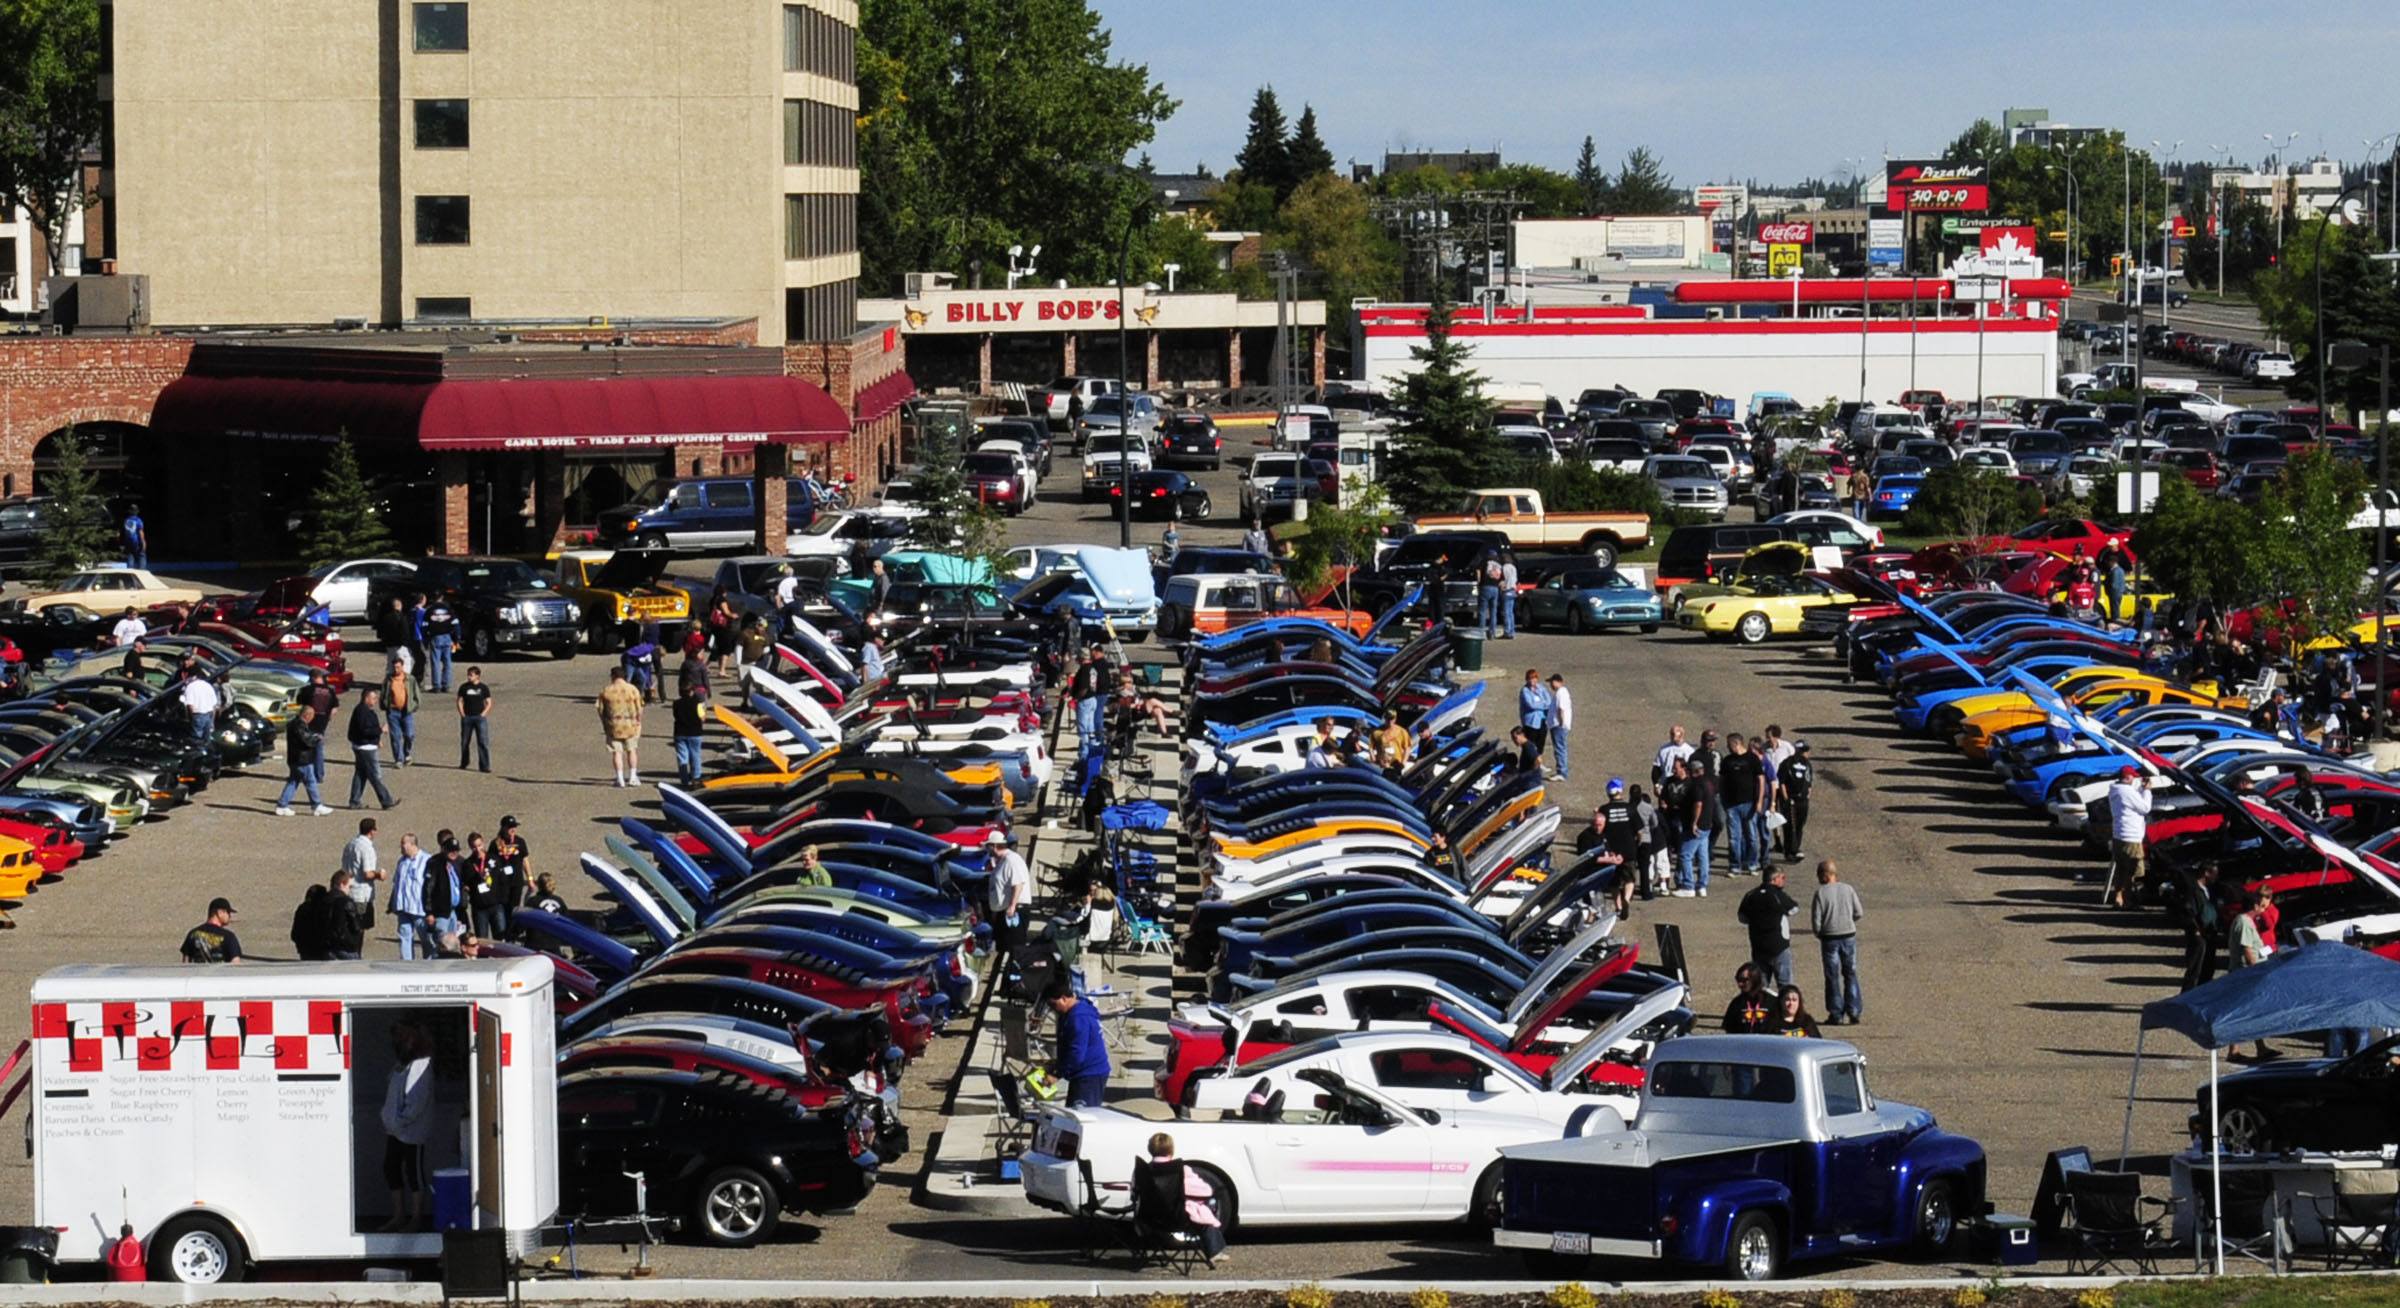 The Capri Hotel and Convention Centre parking lot was the gathering place of Mustang enthusiasts and their cars Saturday during the 2010 International Mustang Meet.